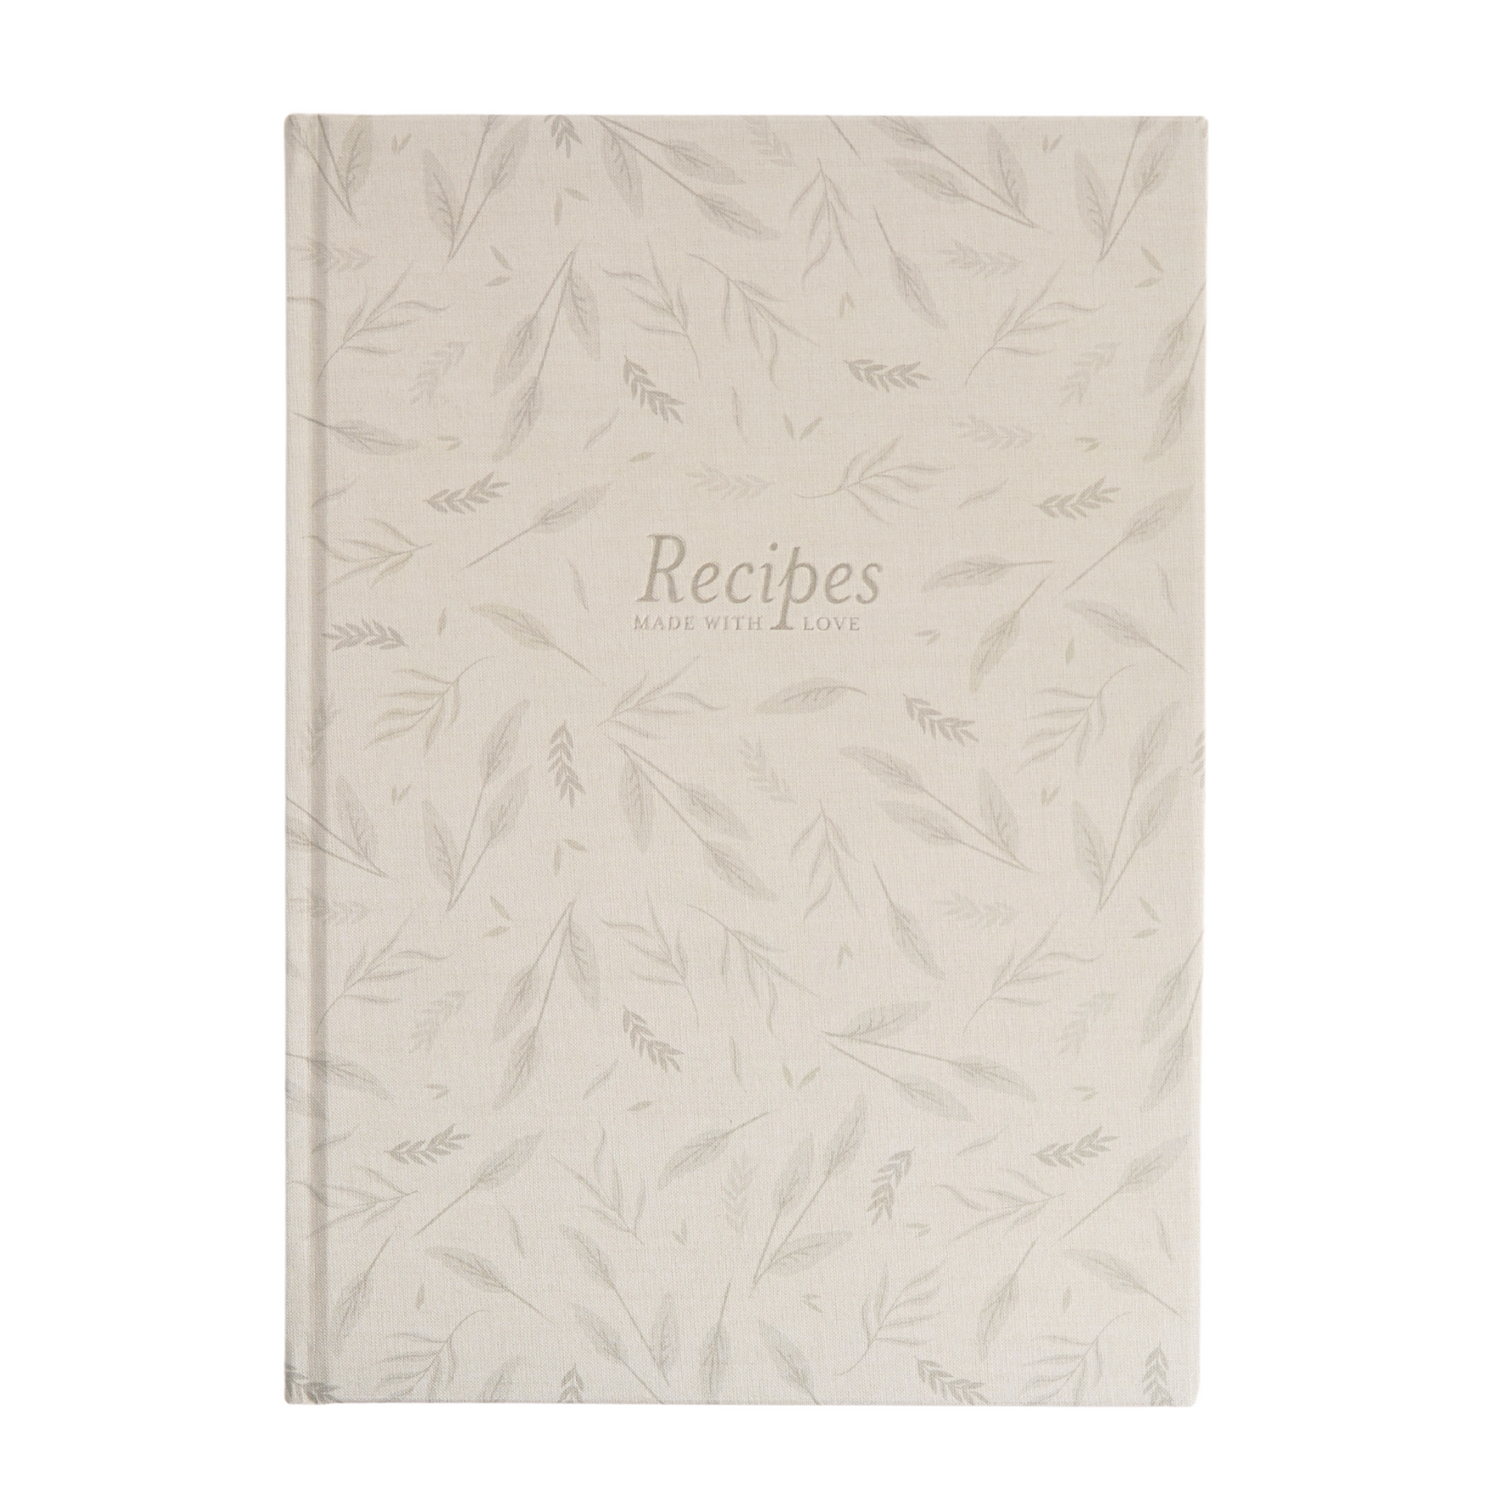 30% off selected Stationery & Recipe products